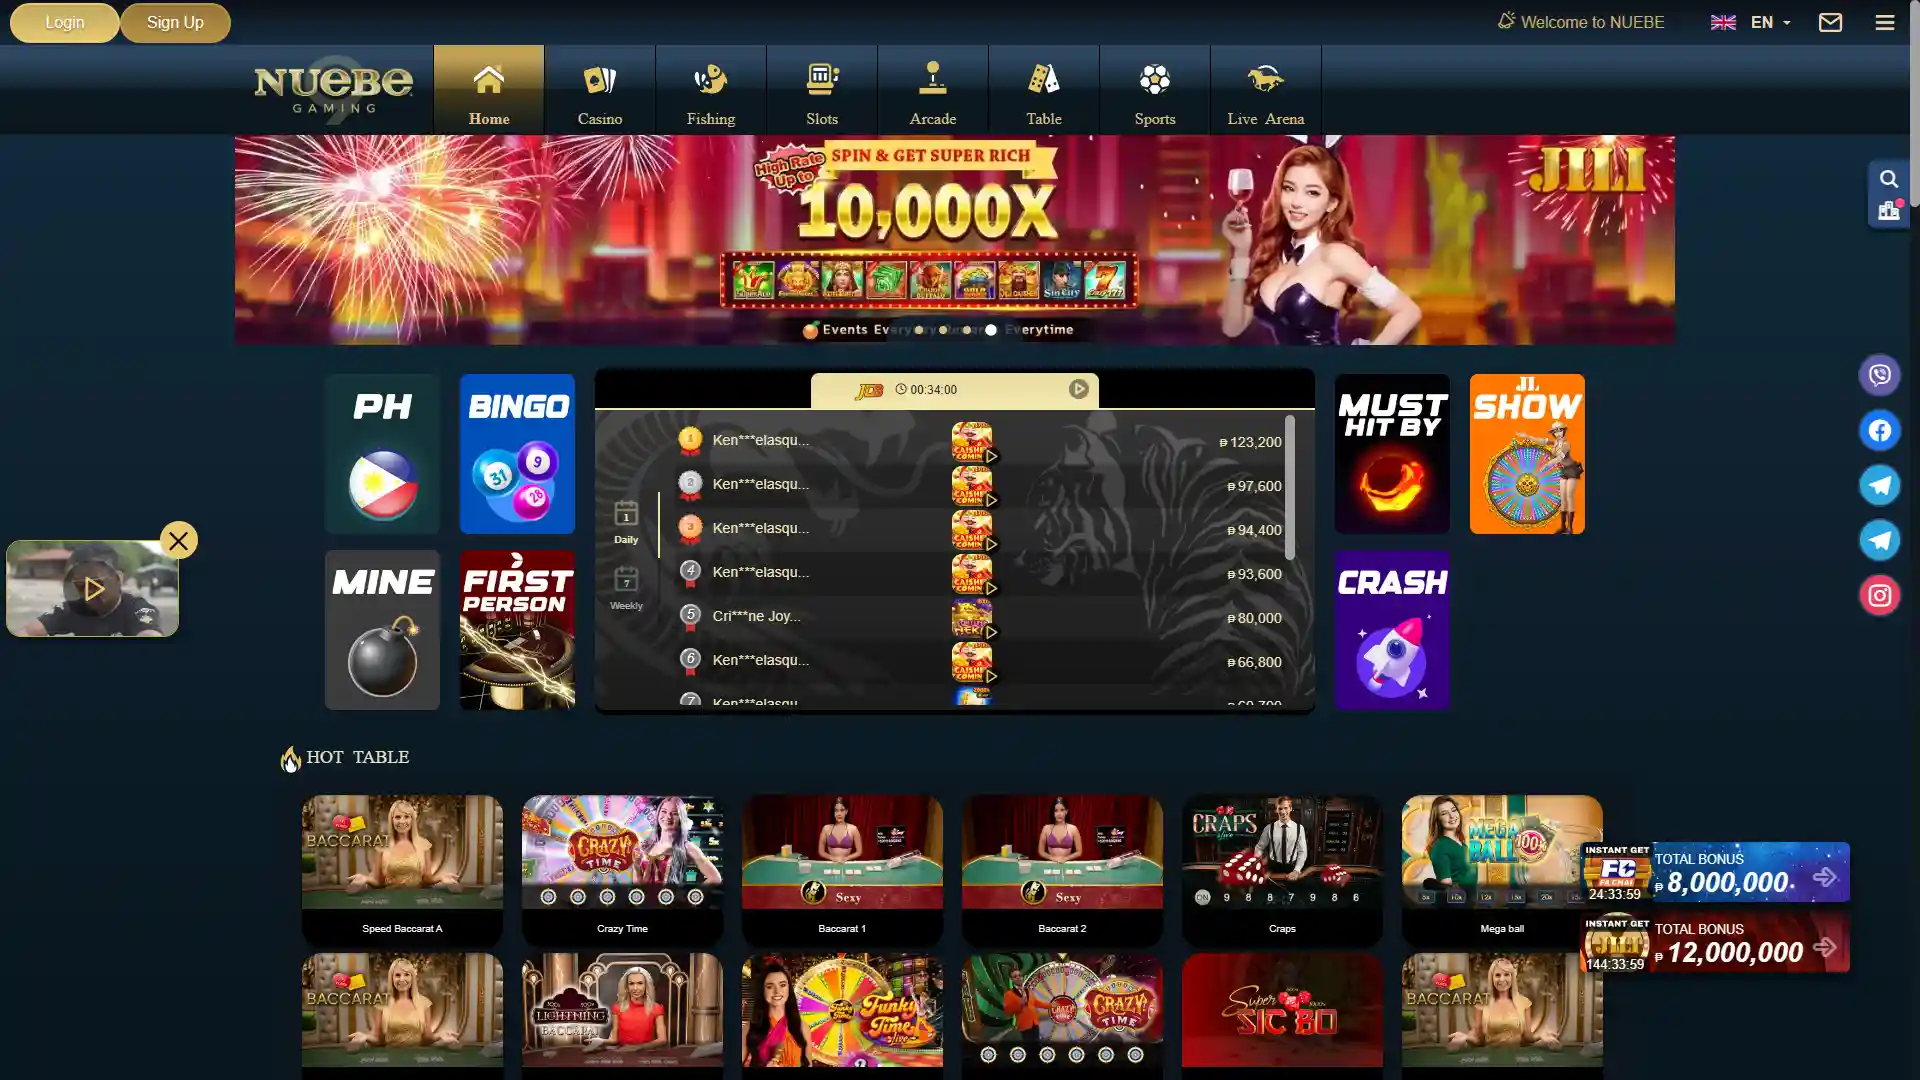 Interactive homepage of Nuebe Gaming showcasing various online casino games and live arenas.